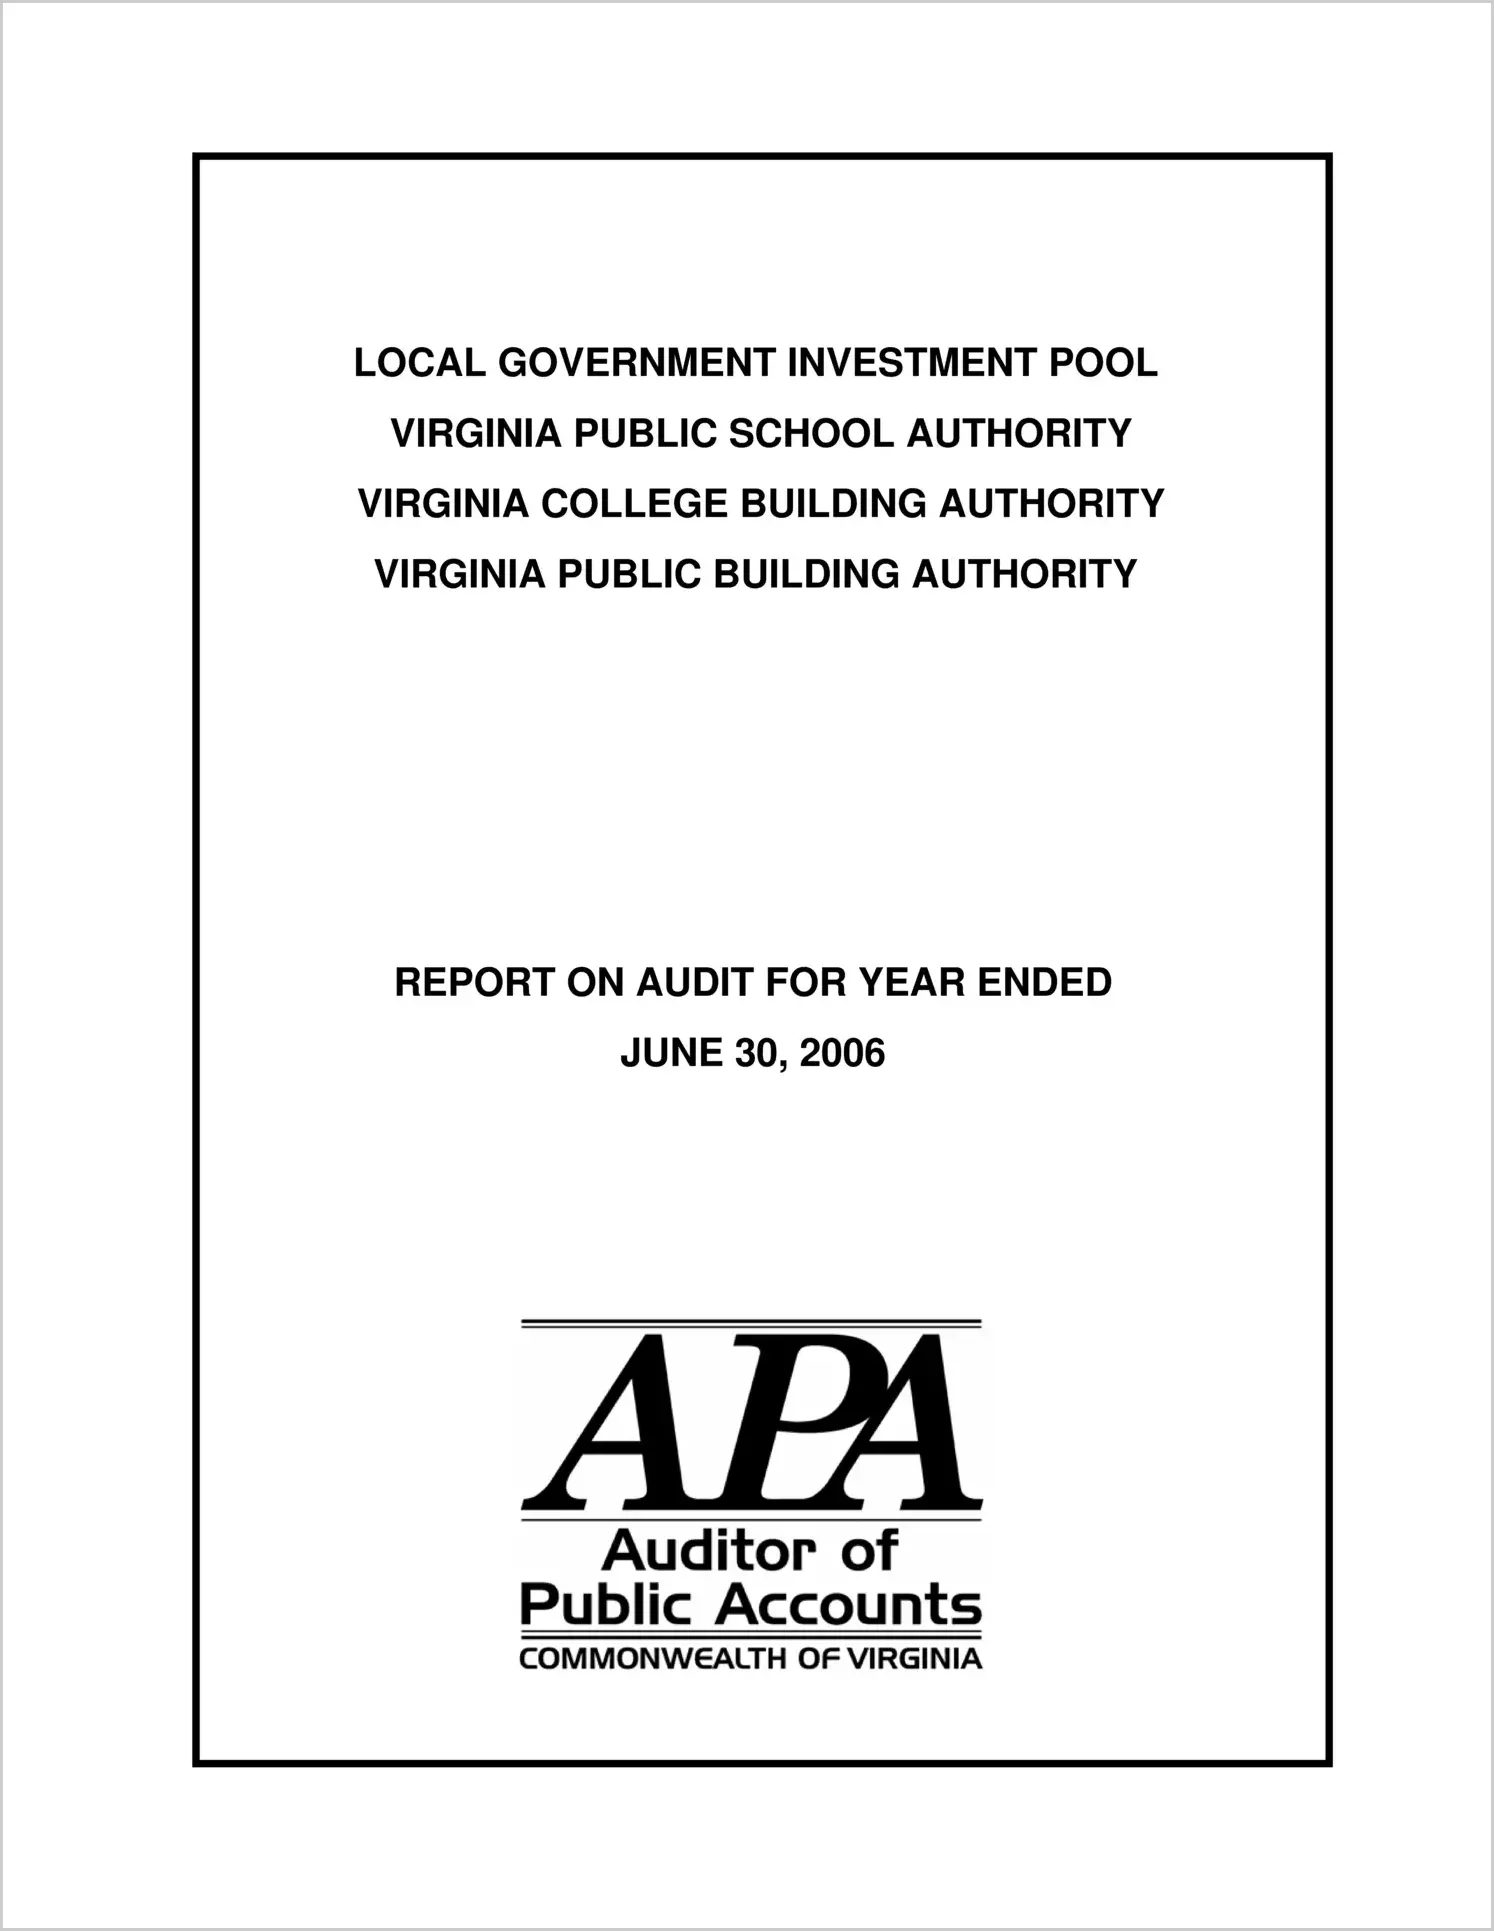 Local Government Investment Pool, Virginia Public School Authority, Virginia College Building Authority, Virginia Public Building Authority Report on Audit for Period Ended June 30, 2006